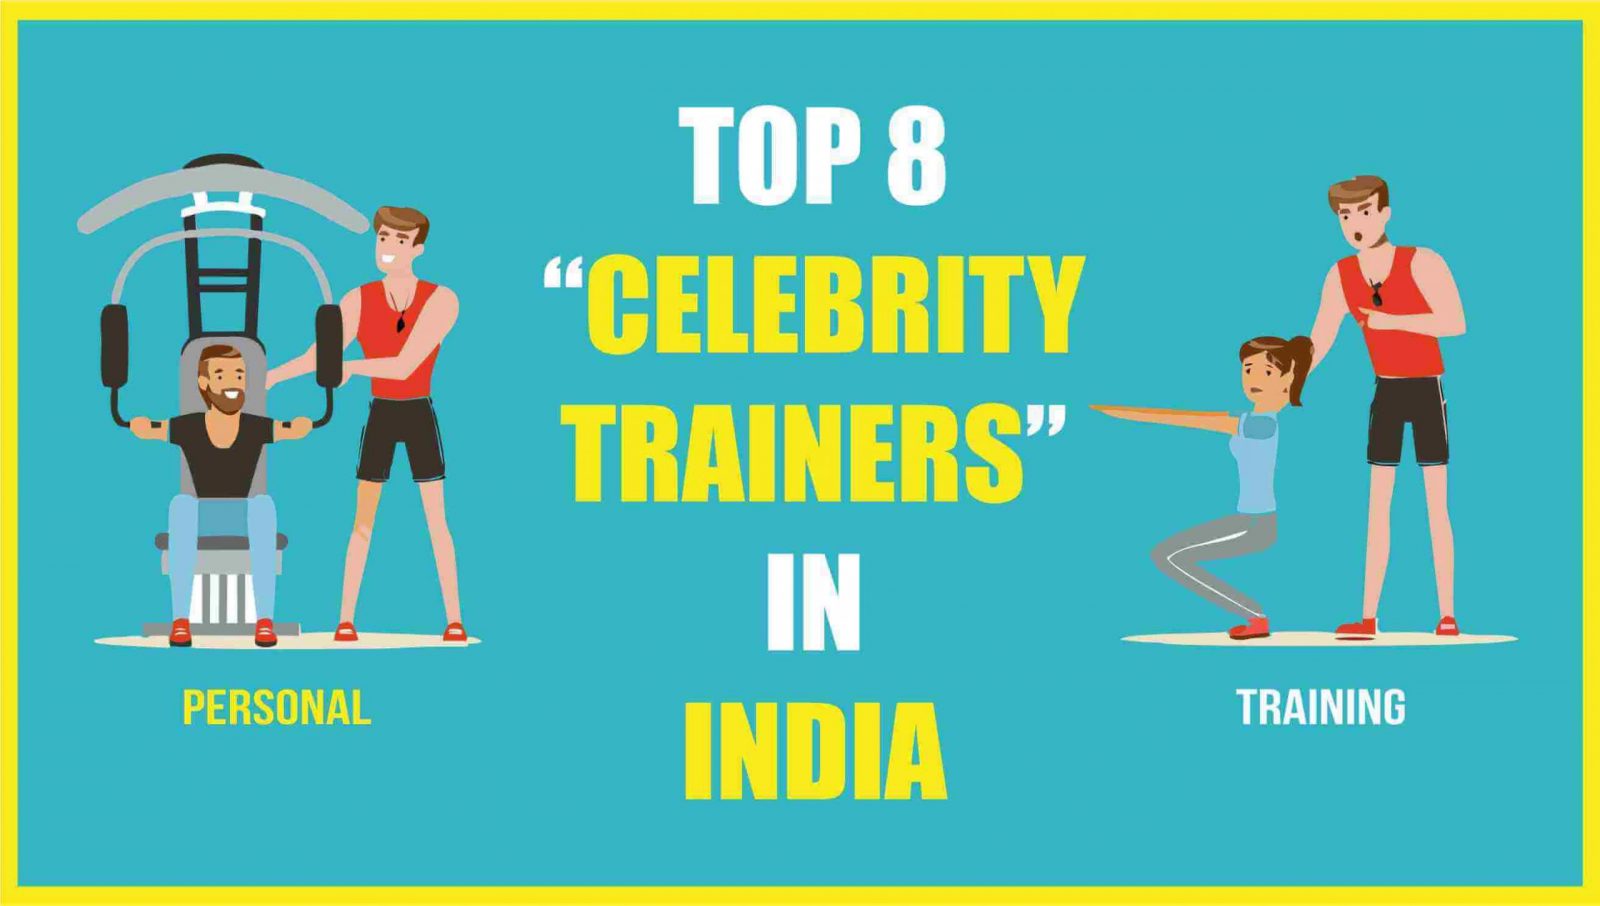 Top 8 Celebrity Fitness Trainers in India